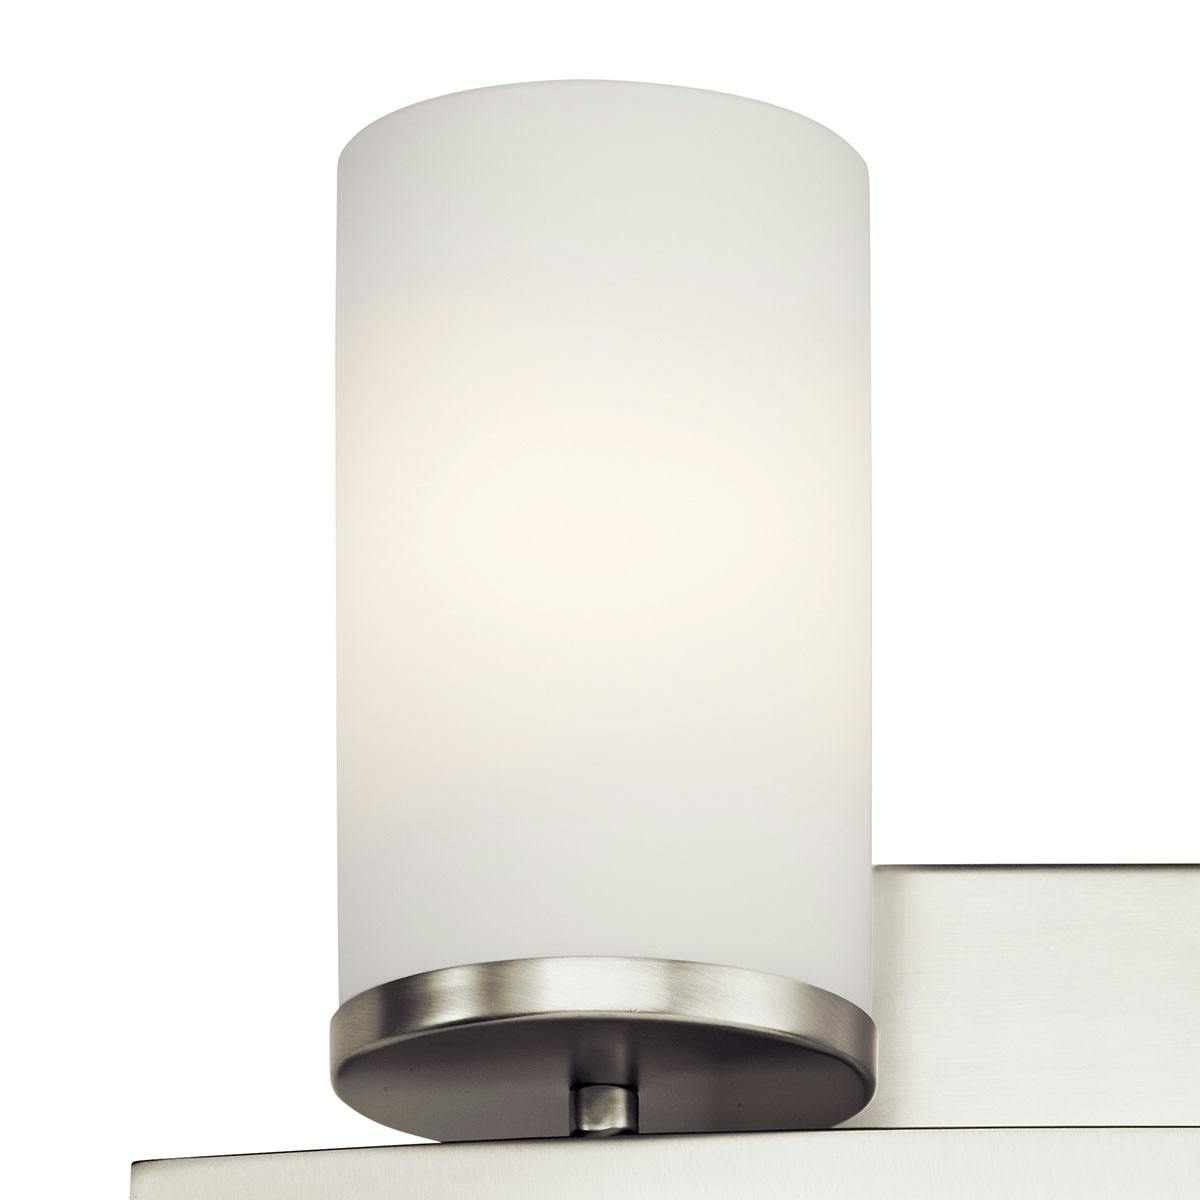 Close up view of the Crosby 15"  Vanity Light Brushed Nickel on a white background